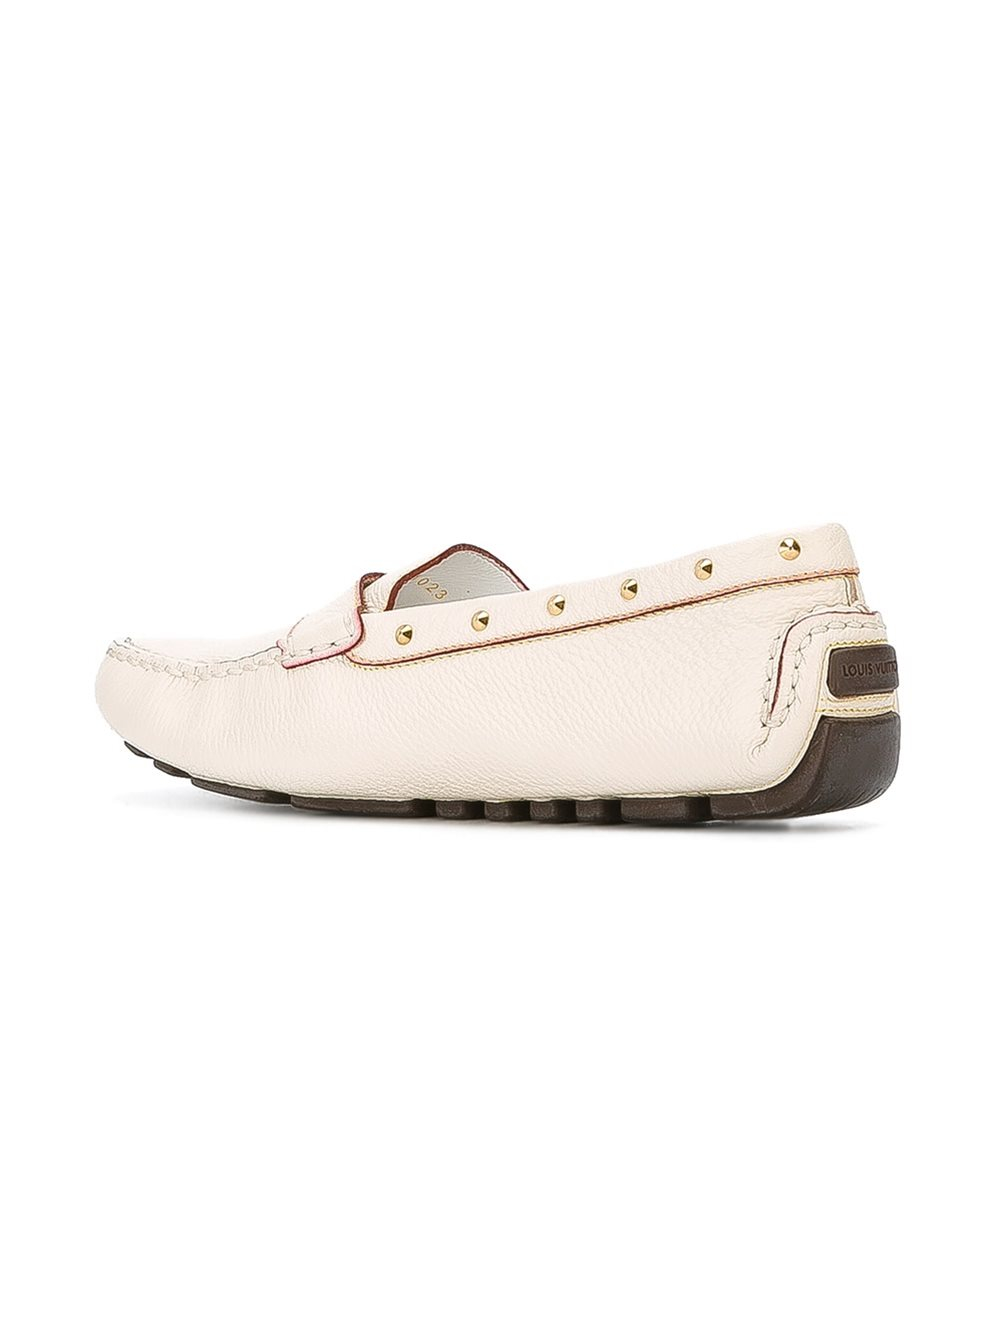 Lyst - Louis Vuitton Studded Loafers in White